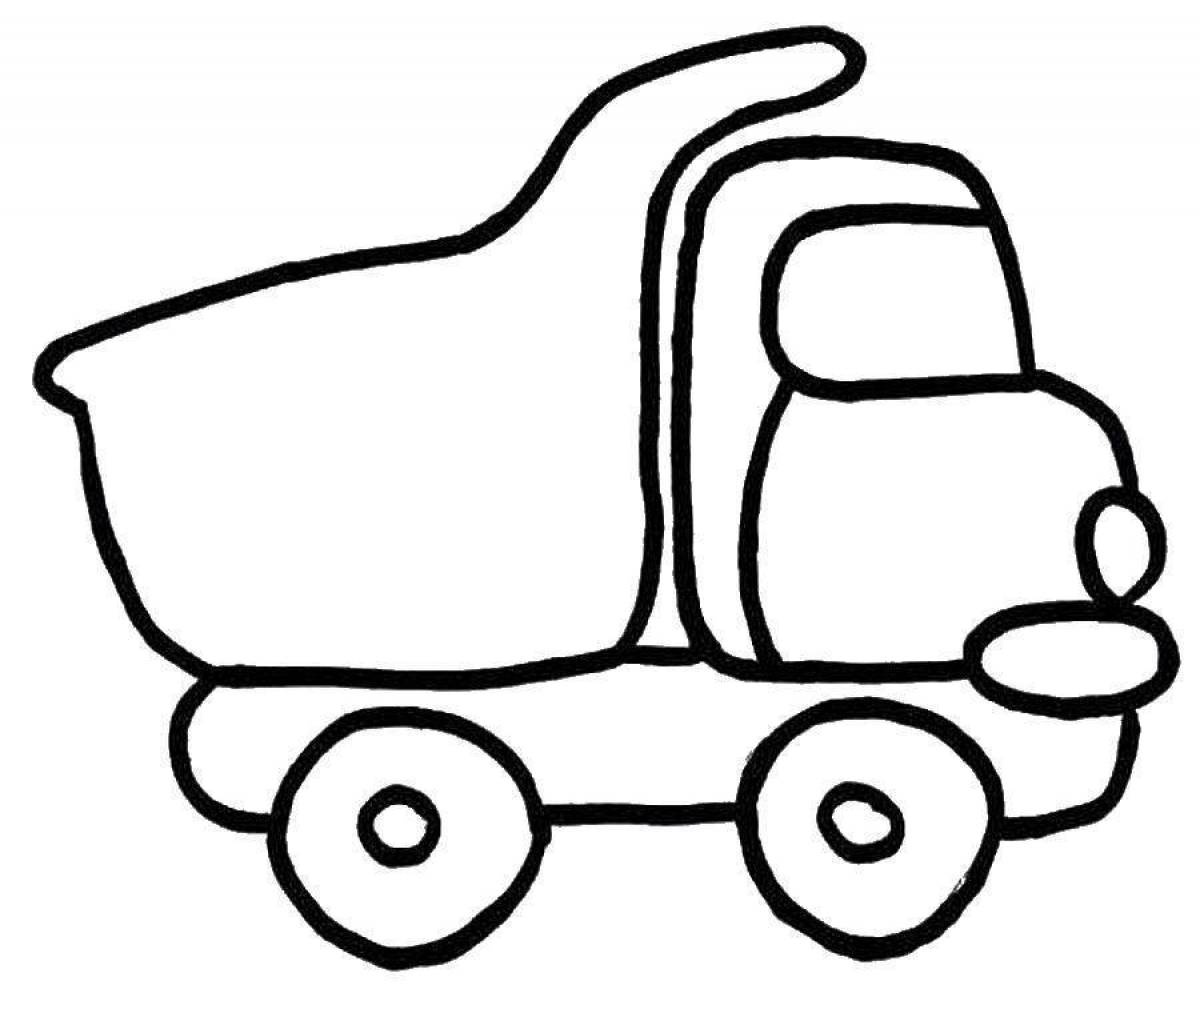 Coloring pages dazzling cars for children 3-4 years old